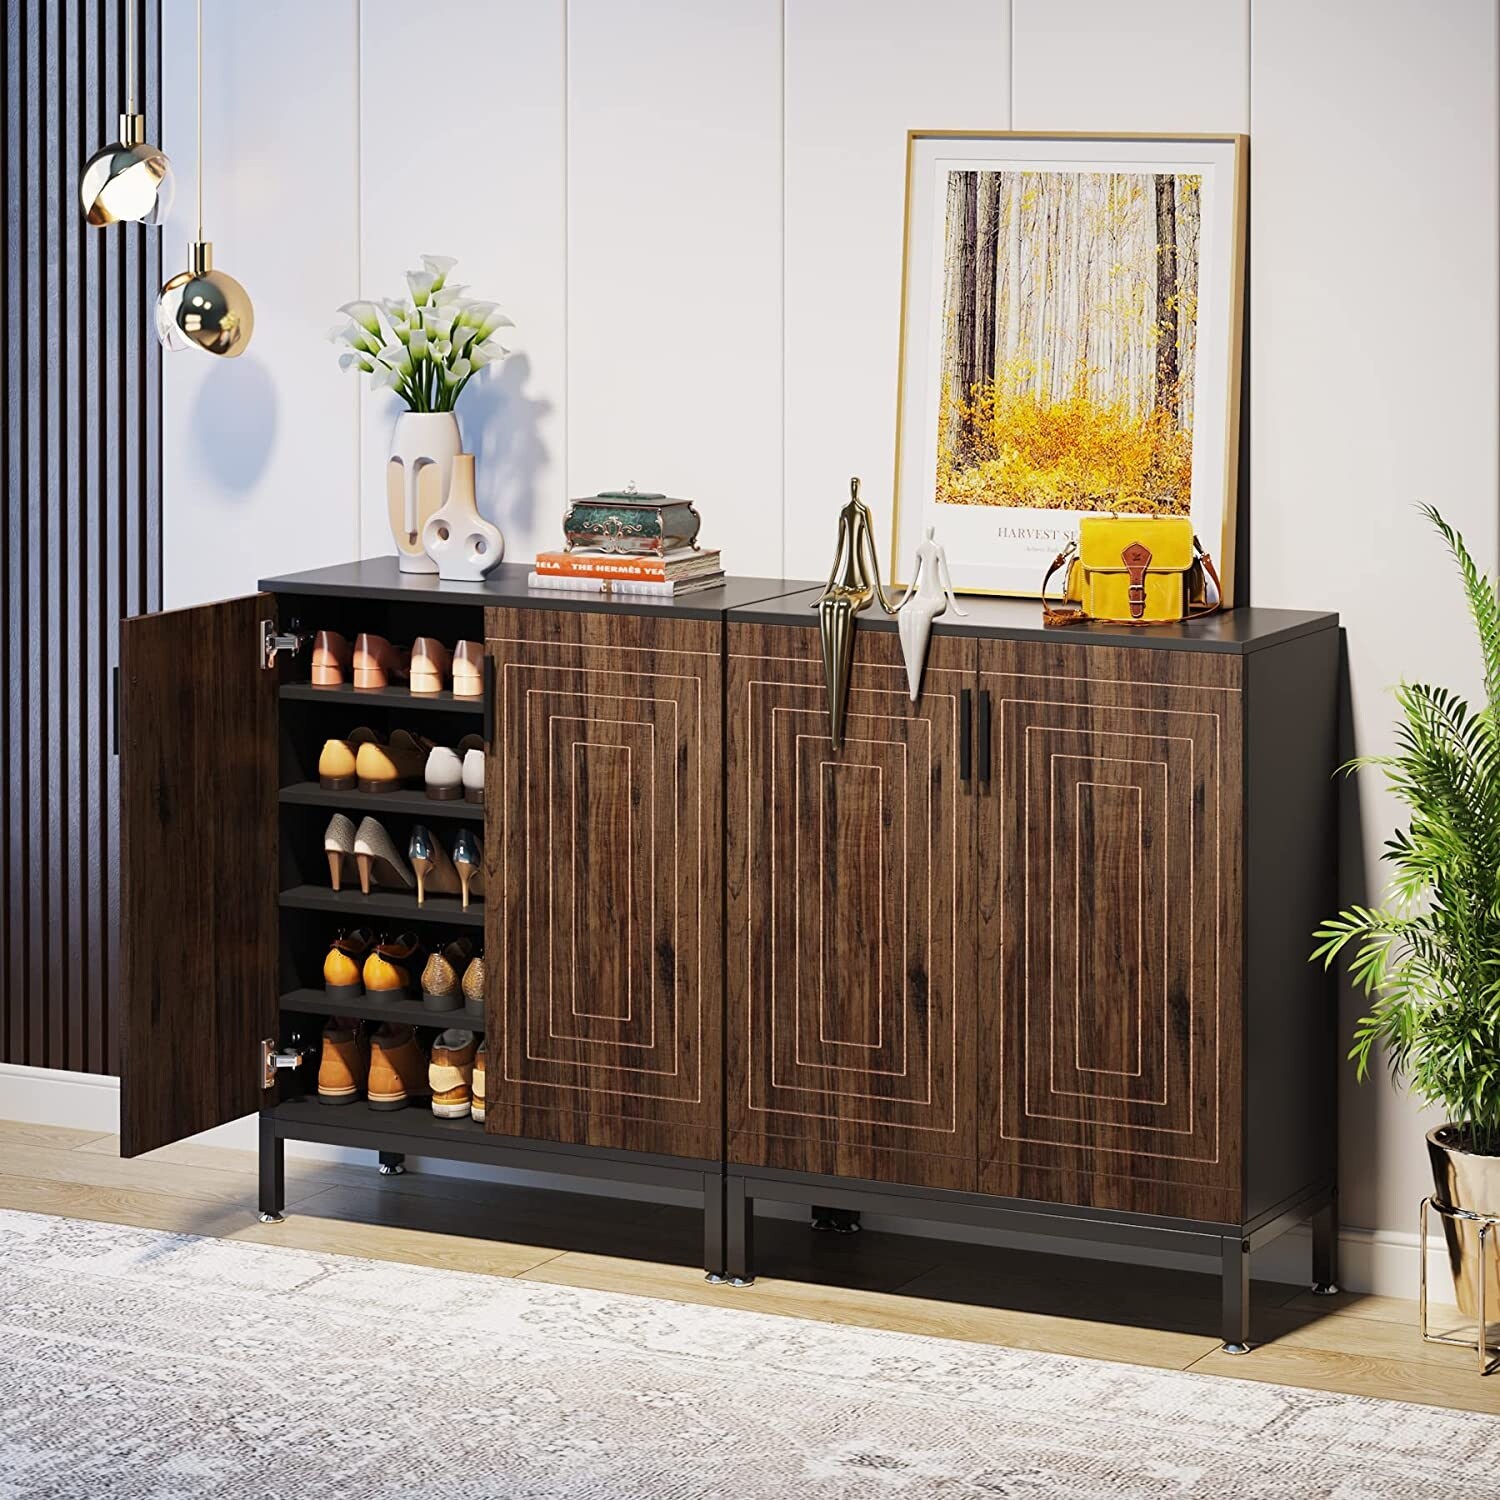 https://ak1.ostkcdn.com/images/products/is/images/direct/ab09799378bafed53eebb1e51c117dbf2b65c931/20-Pairs-Shoe-Storage-Cabinet-for-Entryway%2C-Freestanding-Shoe-Rack-Organizer.jpg